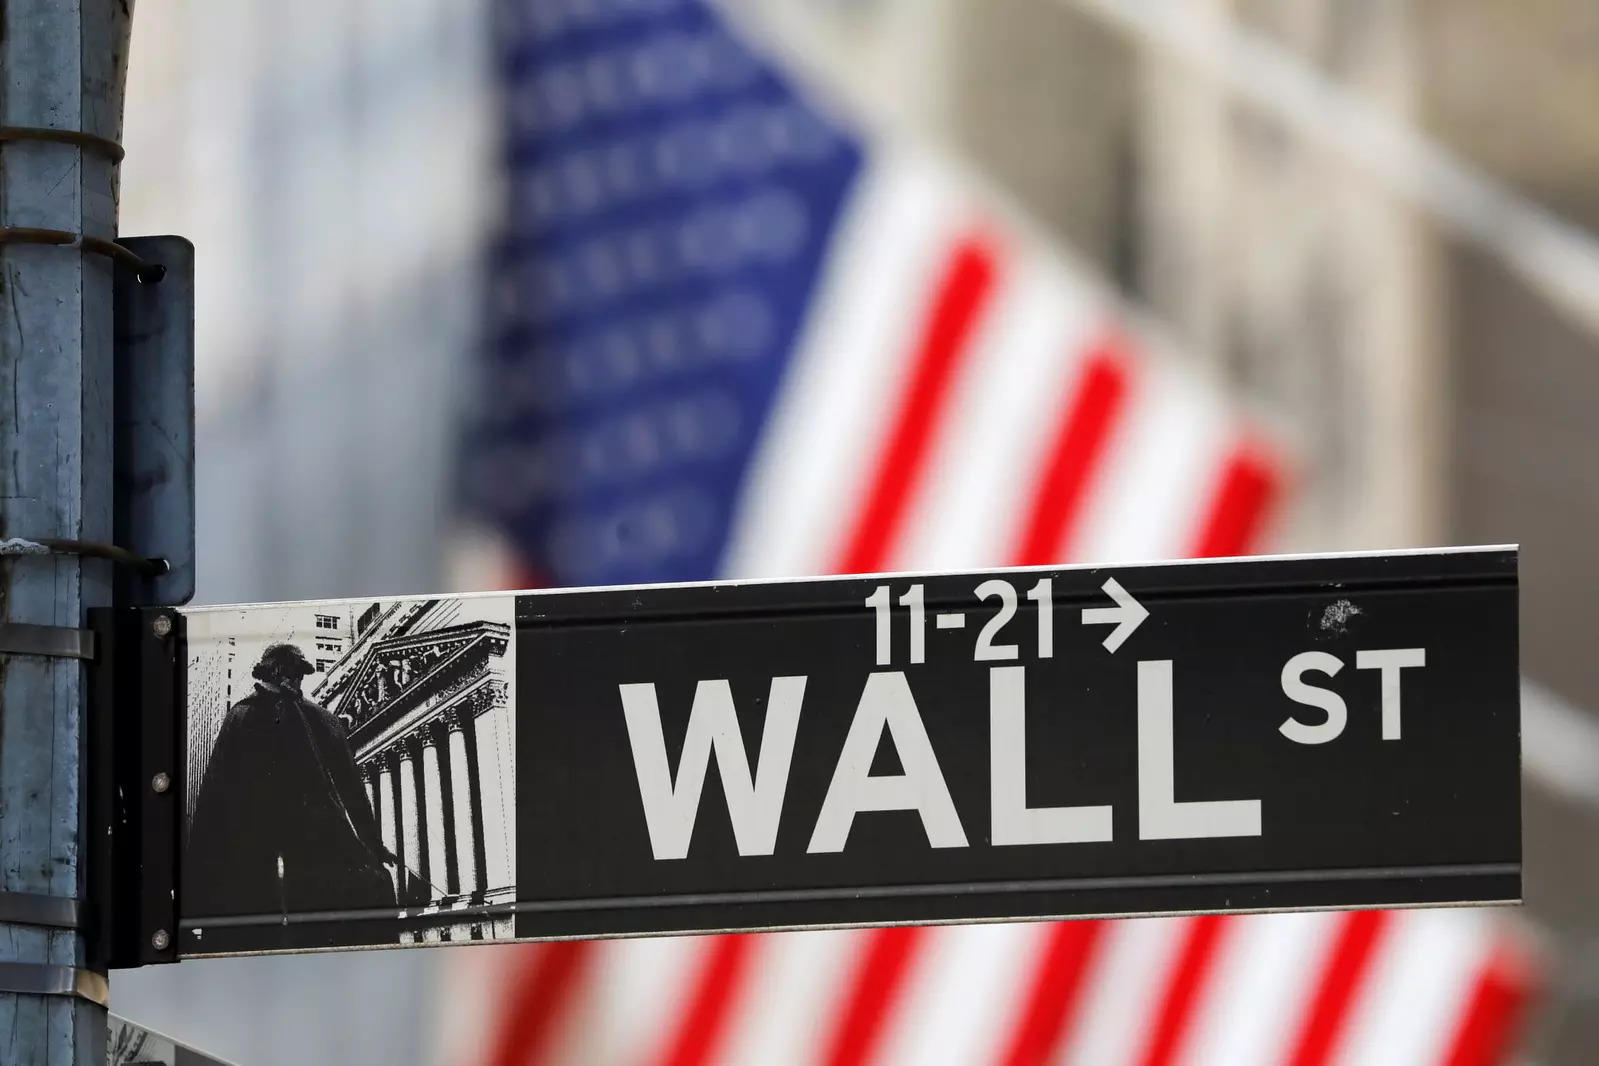 Wall Street reverses, ends higher in late session rally